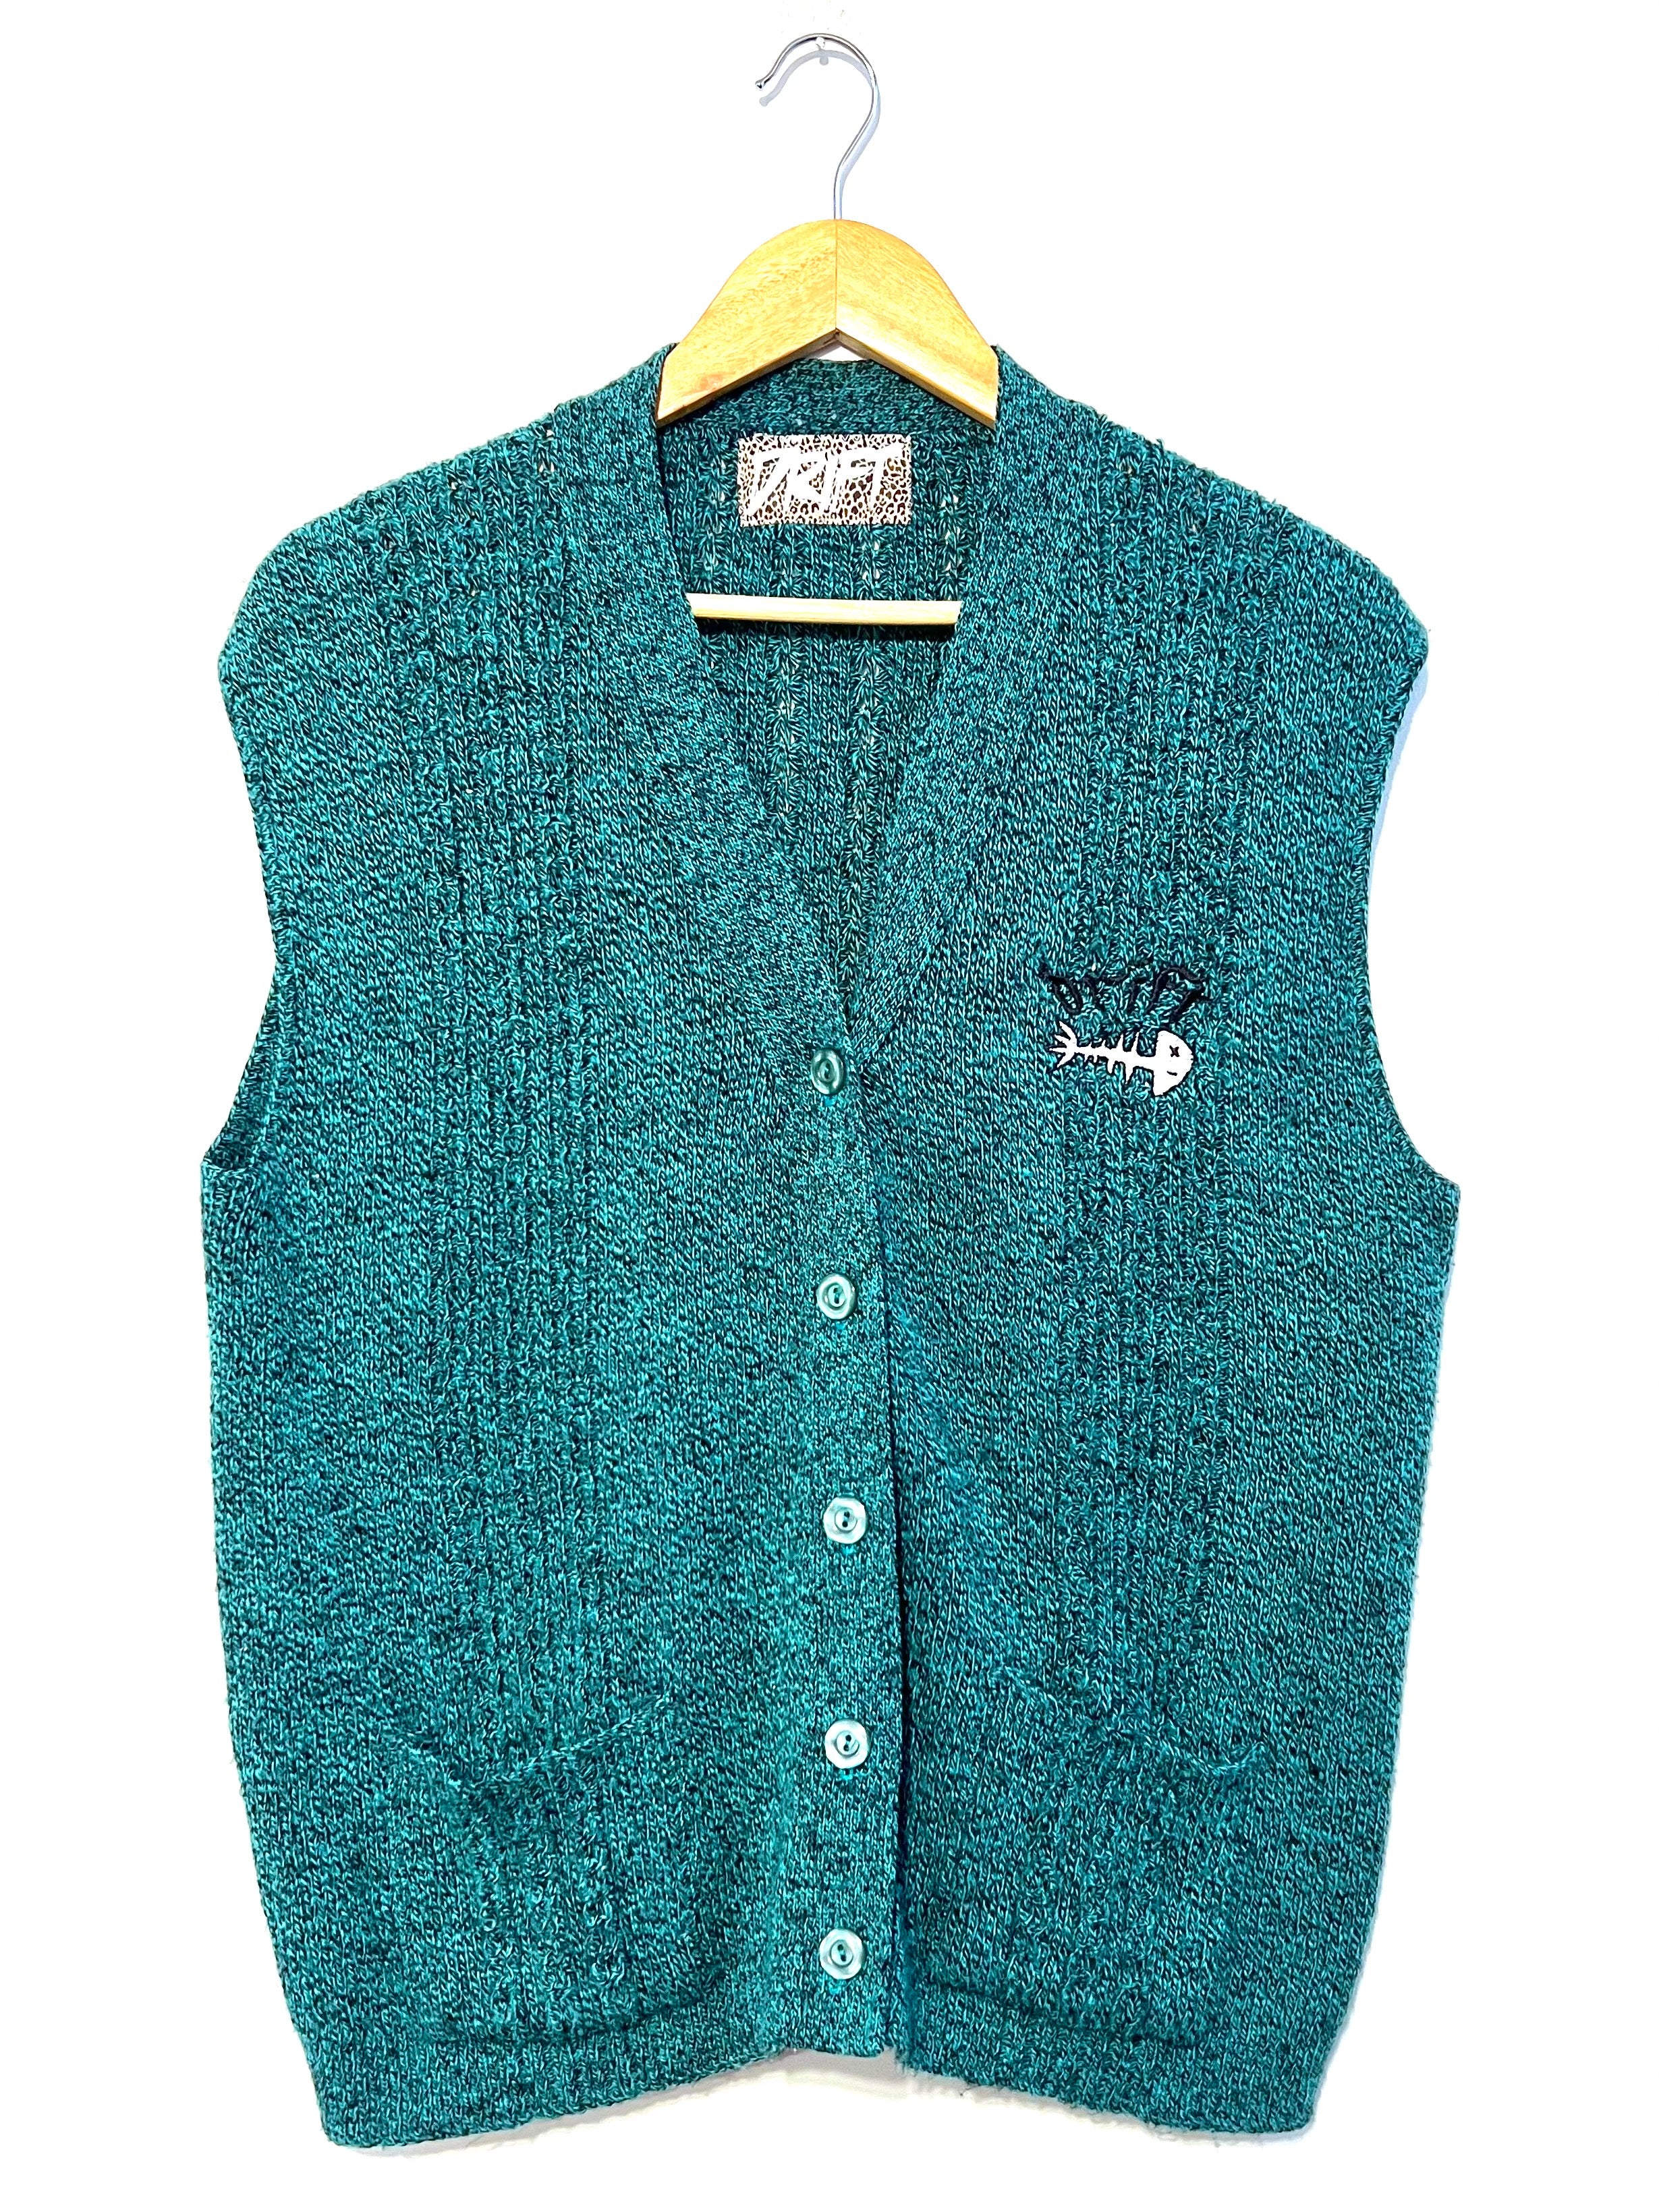 WASHED UP SWEATER VEST